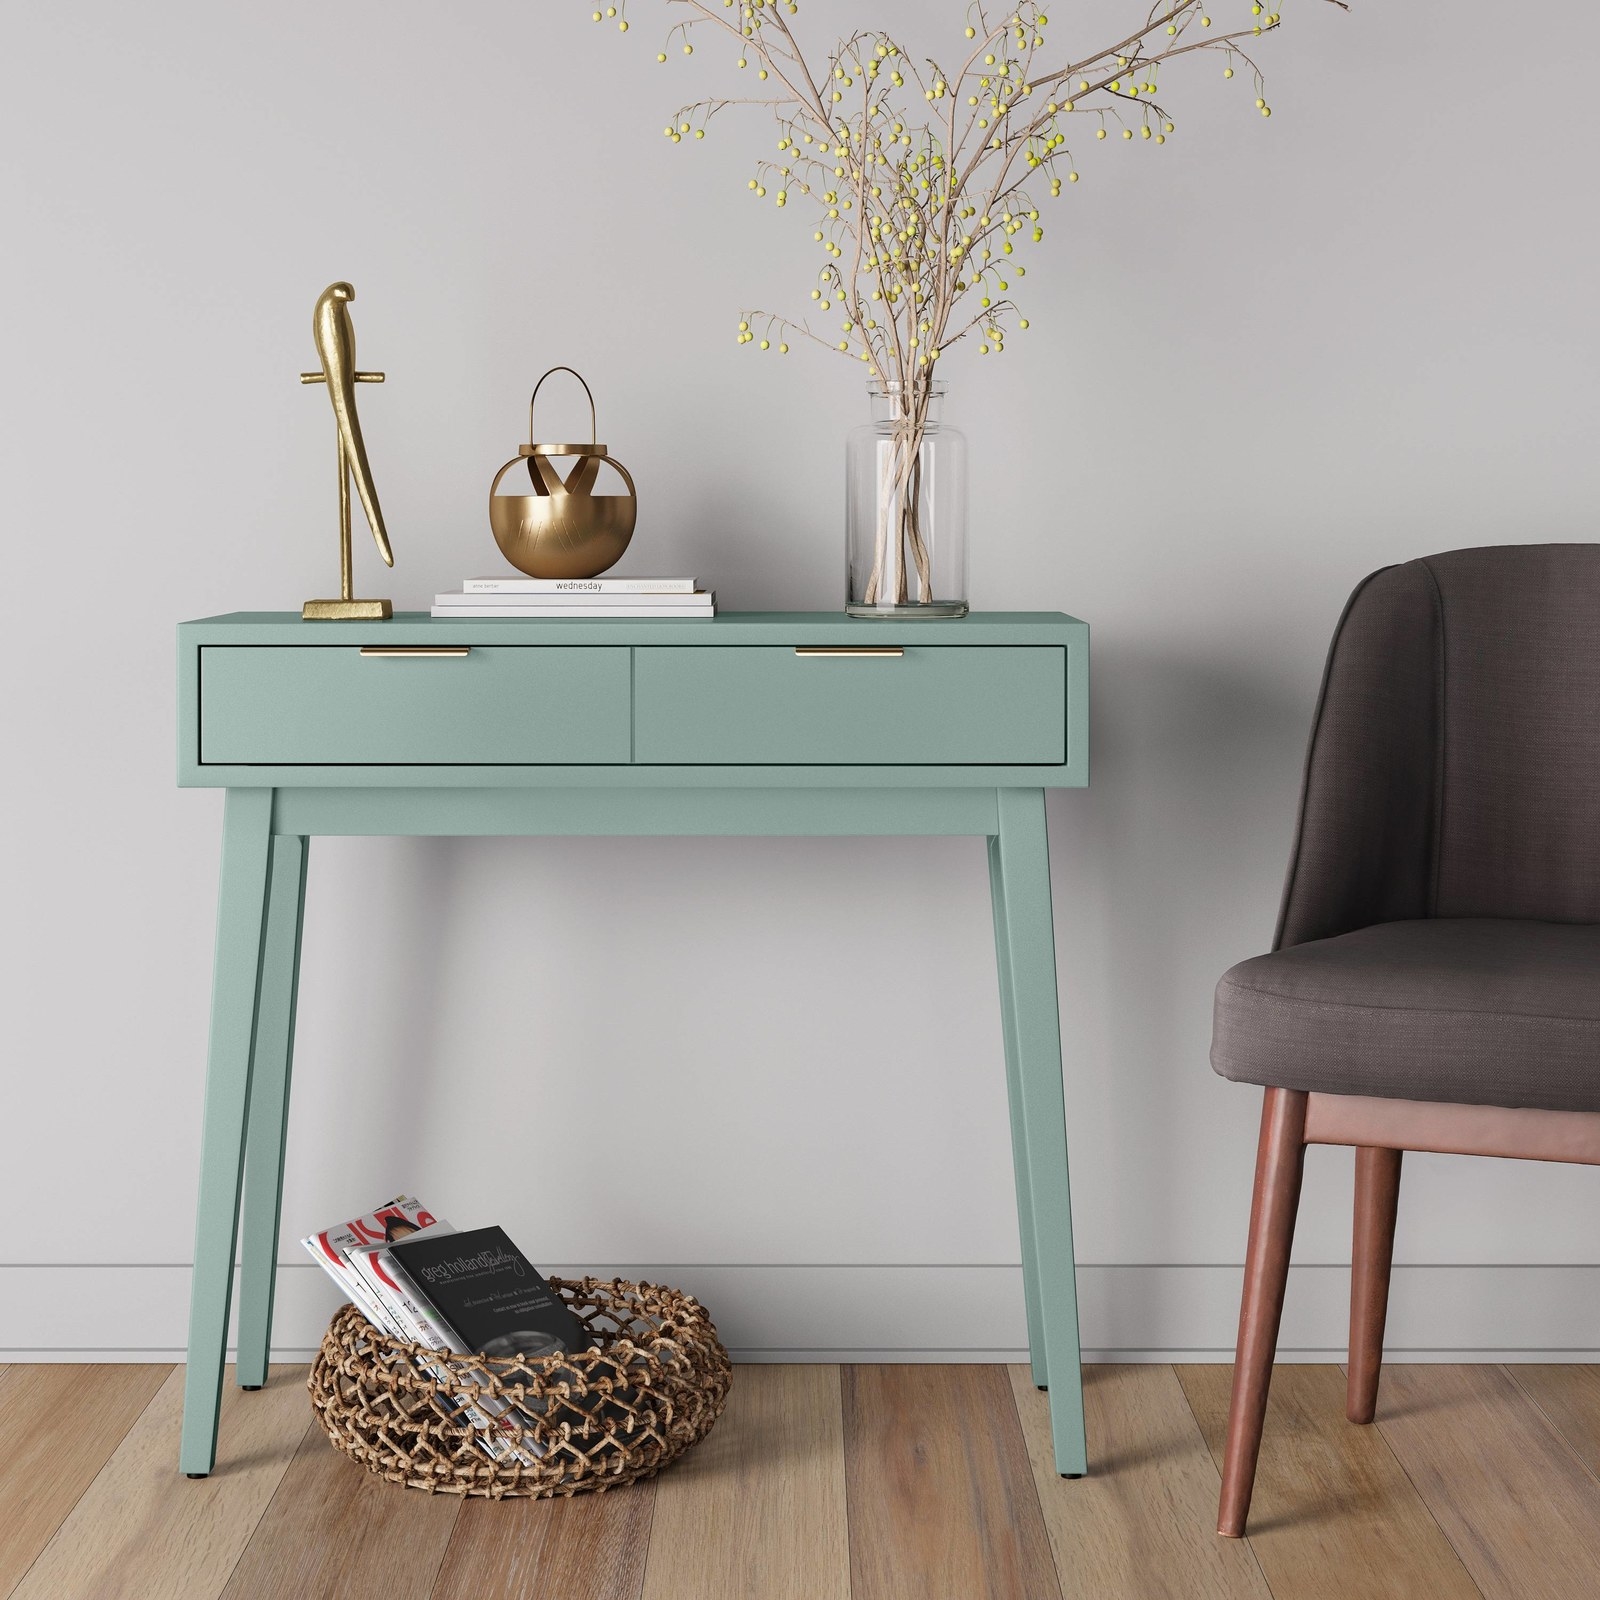 28 Of The Best Places To Buy Inexpensive Furniture Online